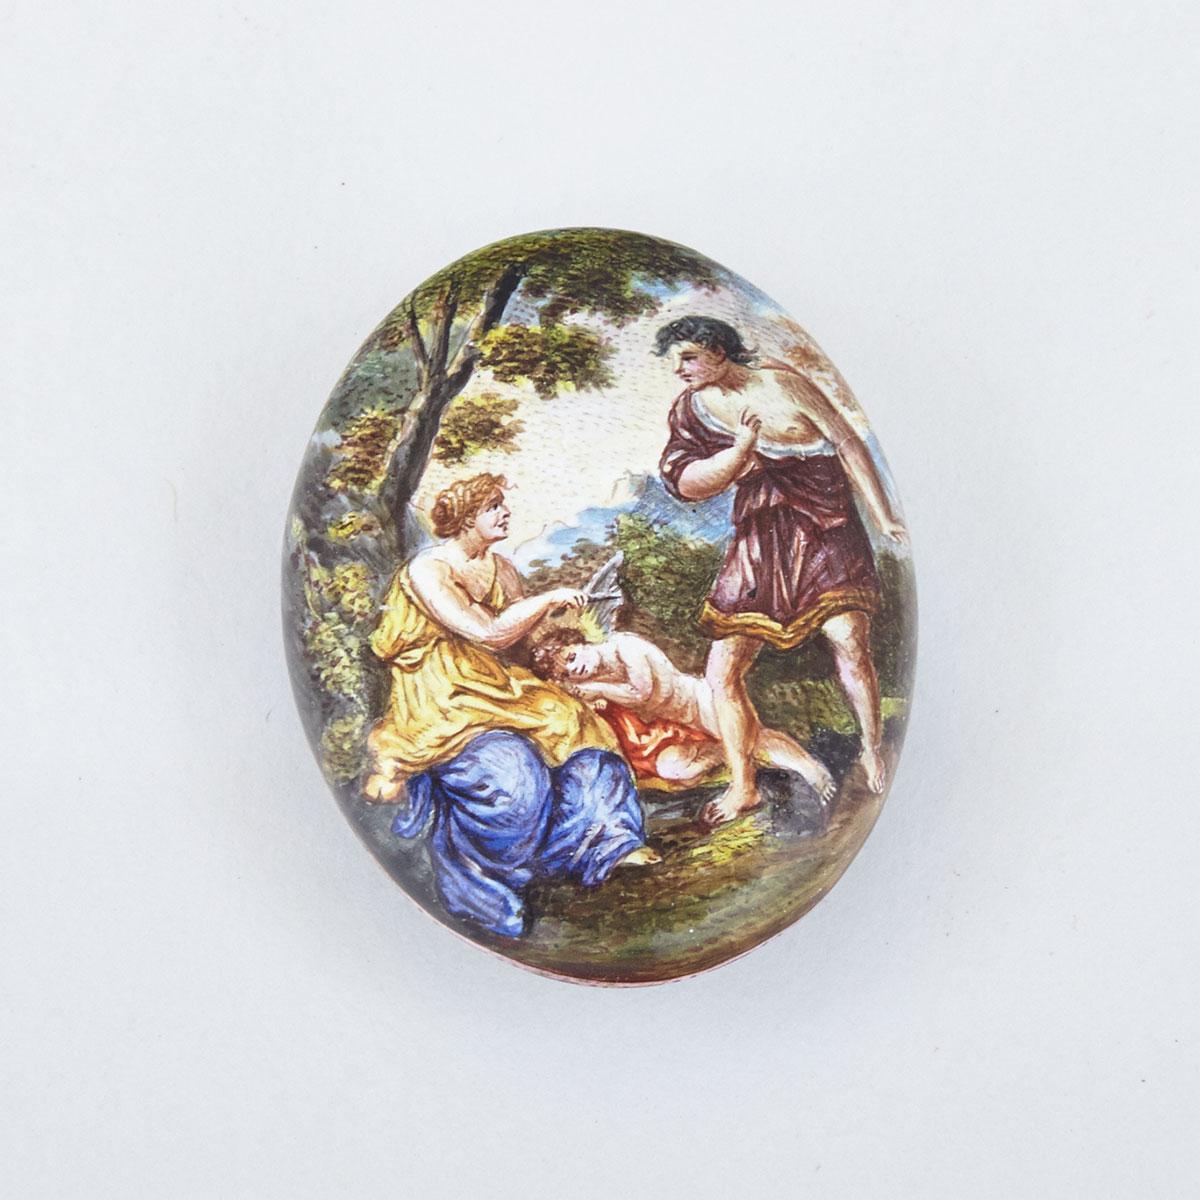 Viennese Enamelled Oval Snuff or Pill Box, 19th century